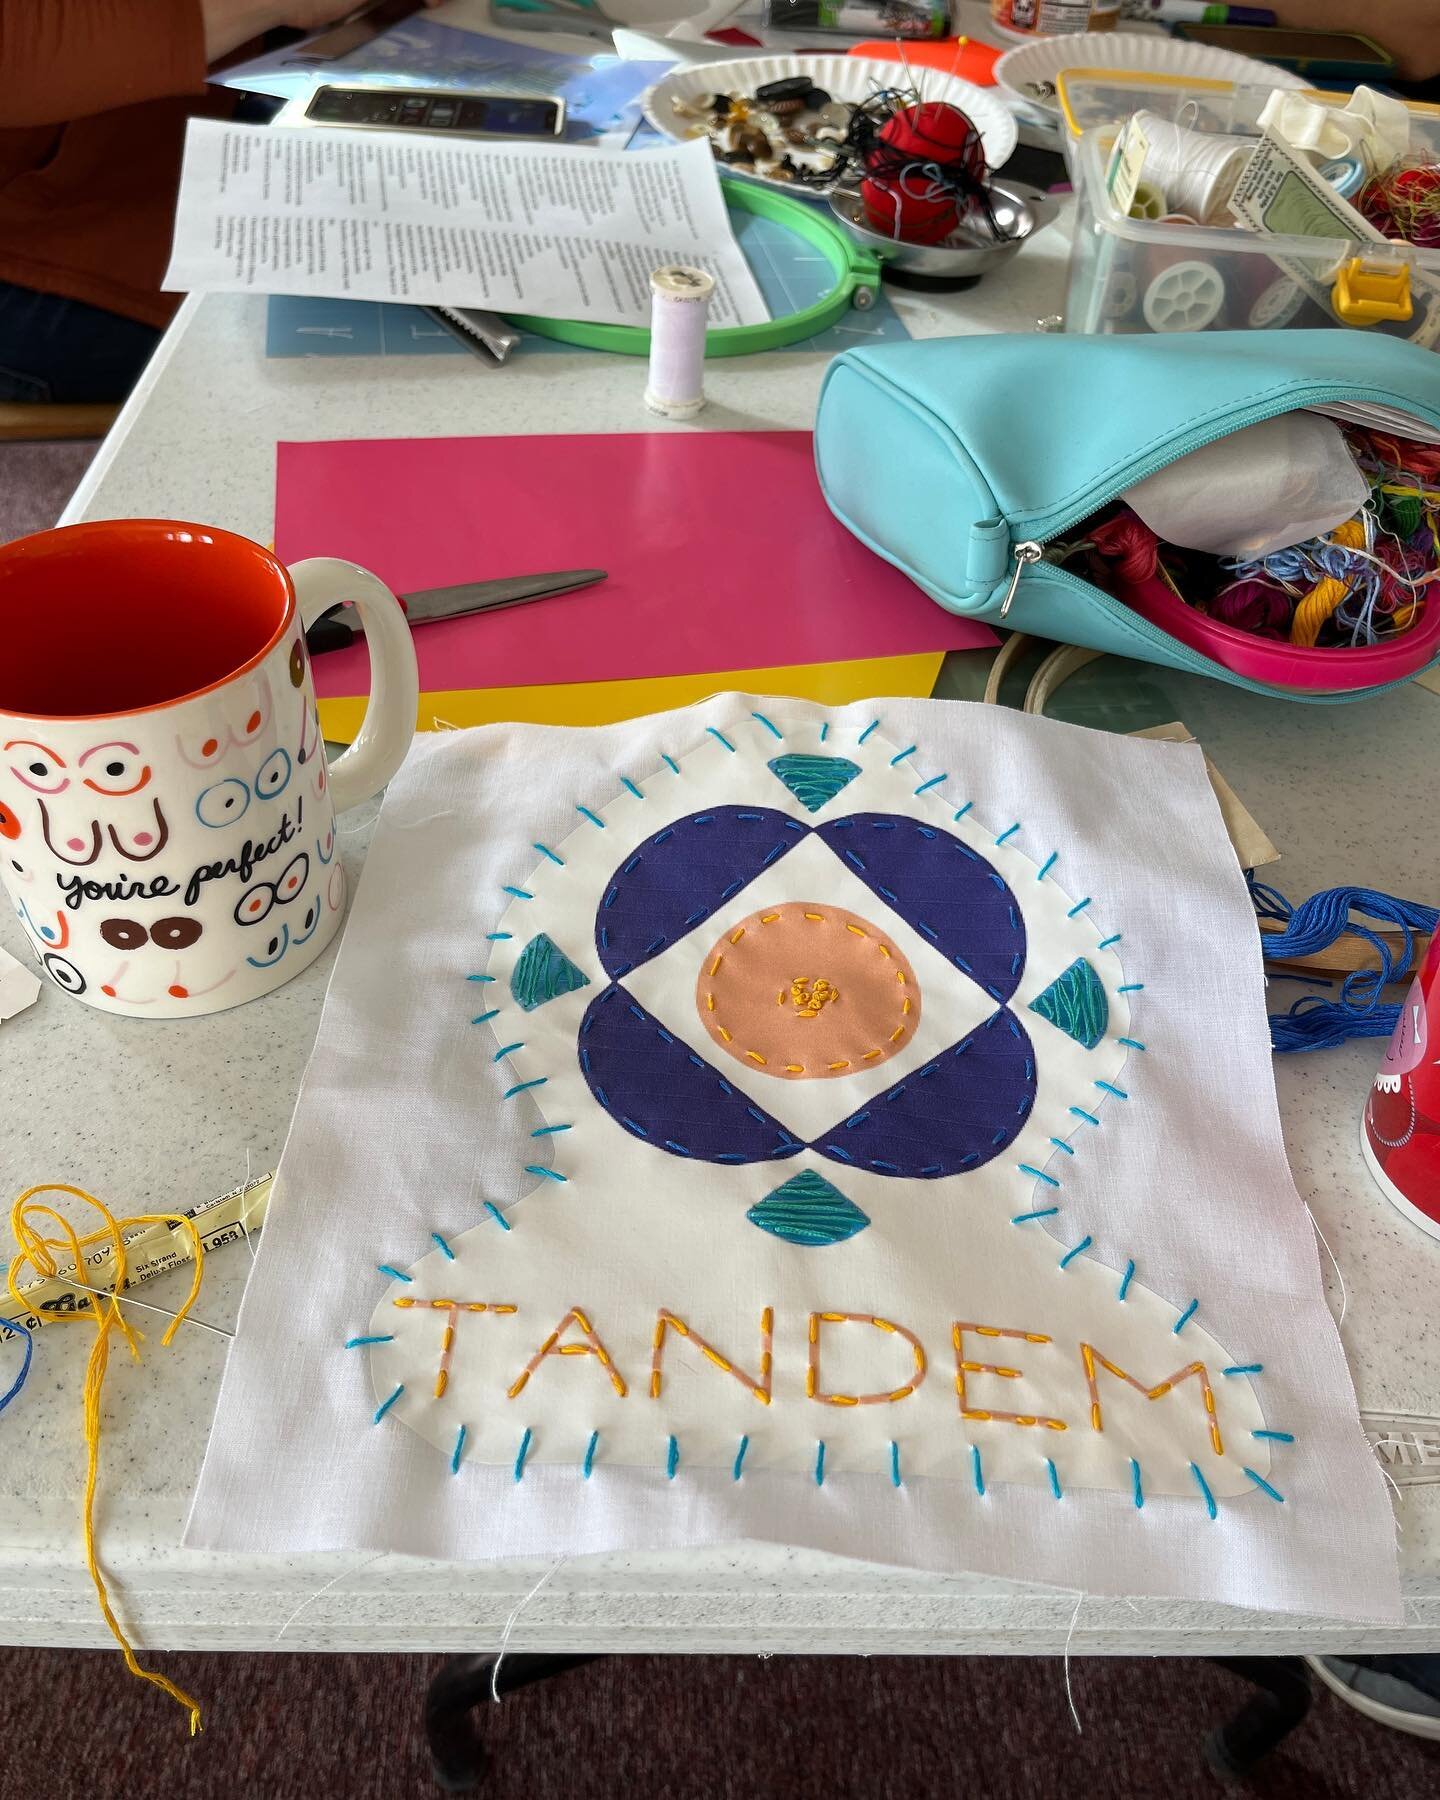 Beautiful day to sew in community! Making quilt squares to support @tandembloomington birth center and postpartum house. Folks can make a square to honor, celebrate or inspire. The final collaborative piece will hang in a birthing suite. If your inte